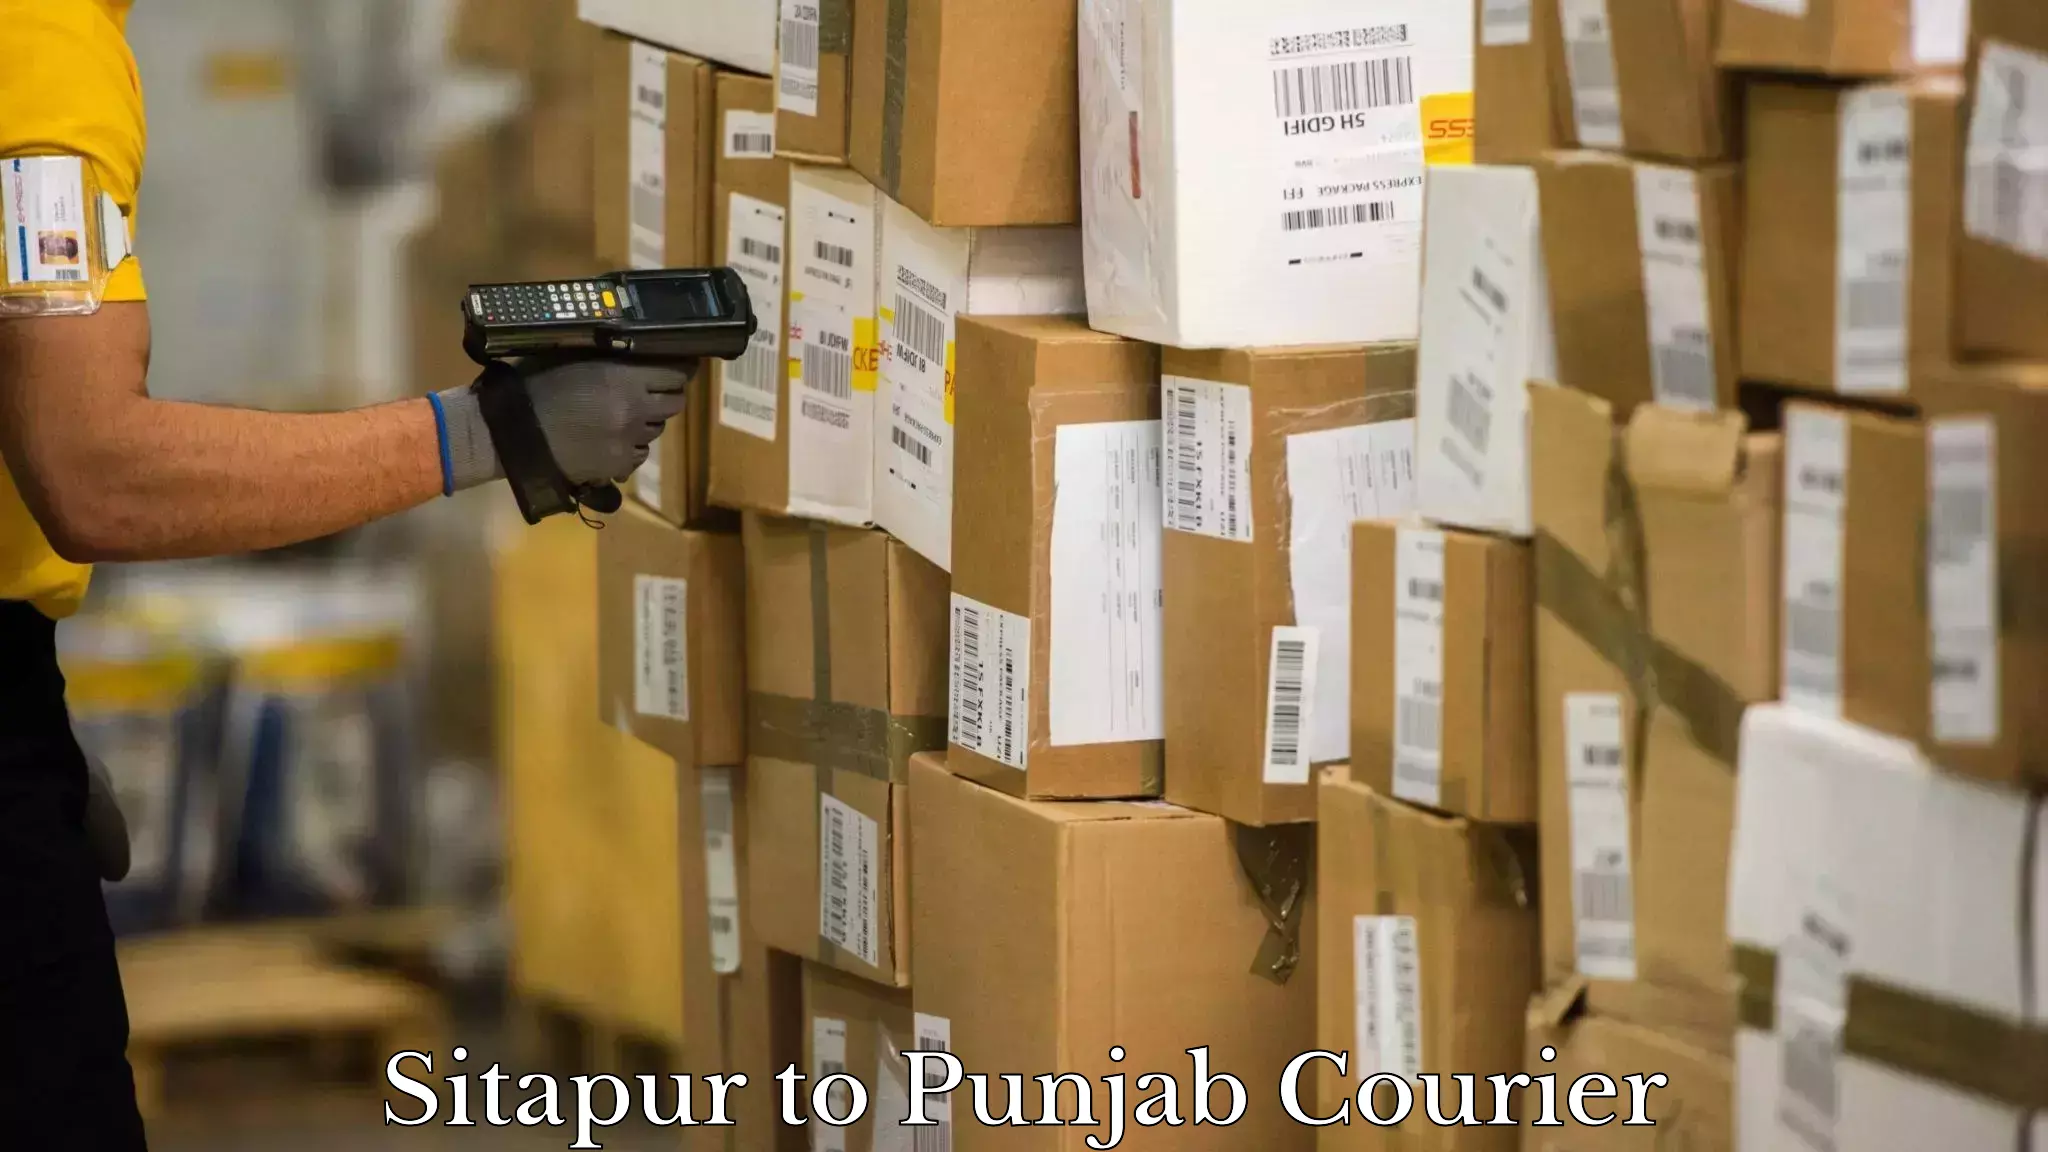 Next-day freight services Sitapur to Punjab